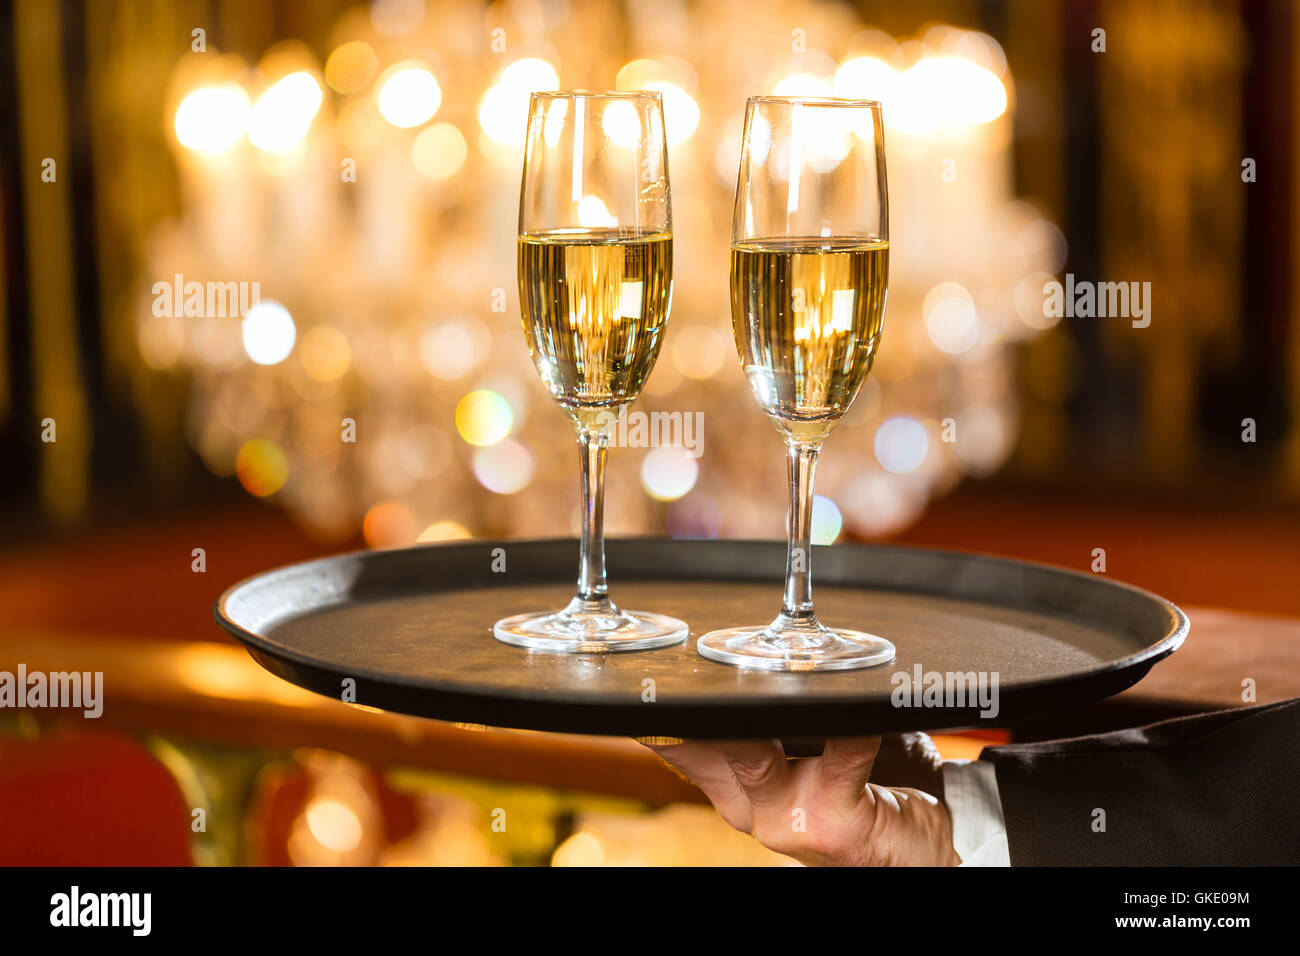 waiter serving champagne glasses on tray Stock Photo